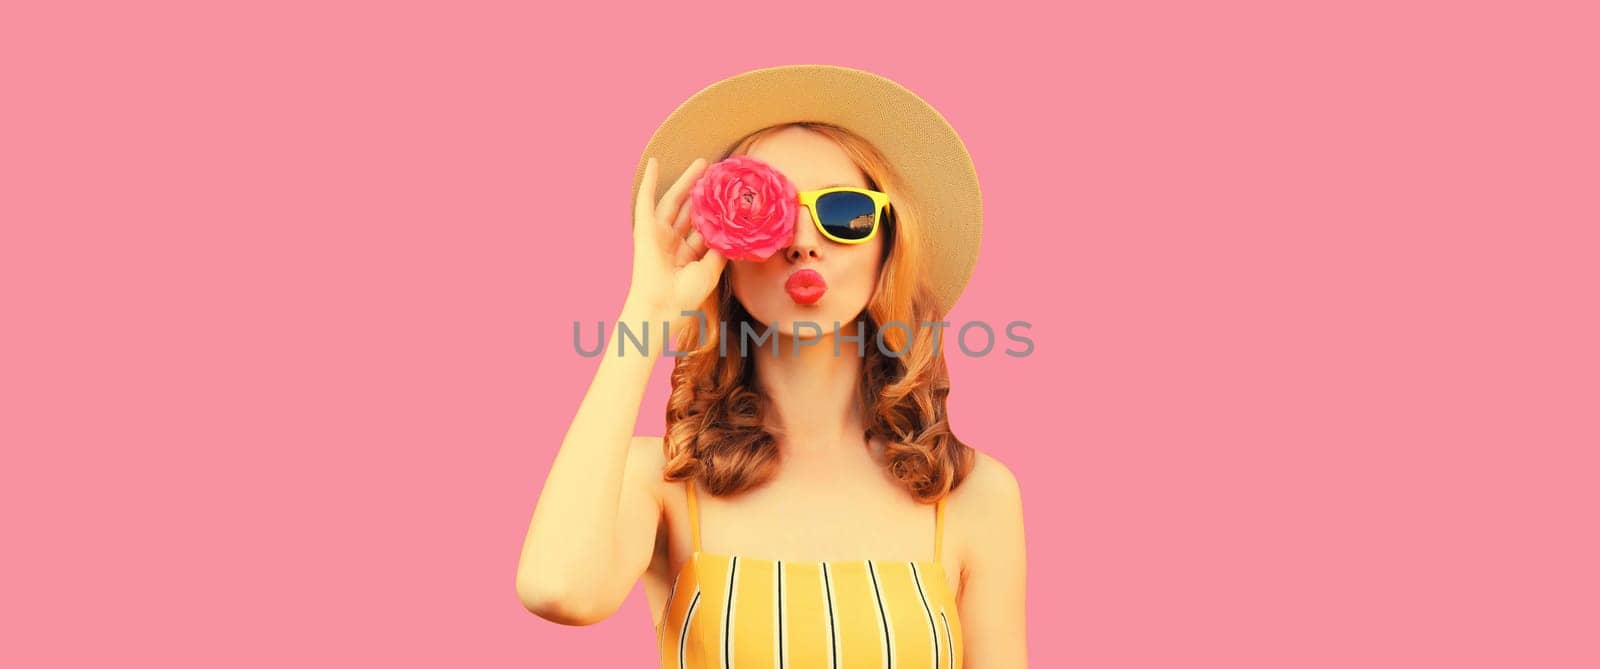 Summer portrait of stylish young woman model blowing kiss with flower buds on pink background by Rohappy